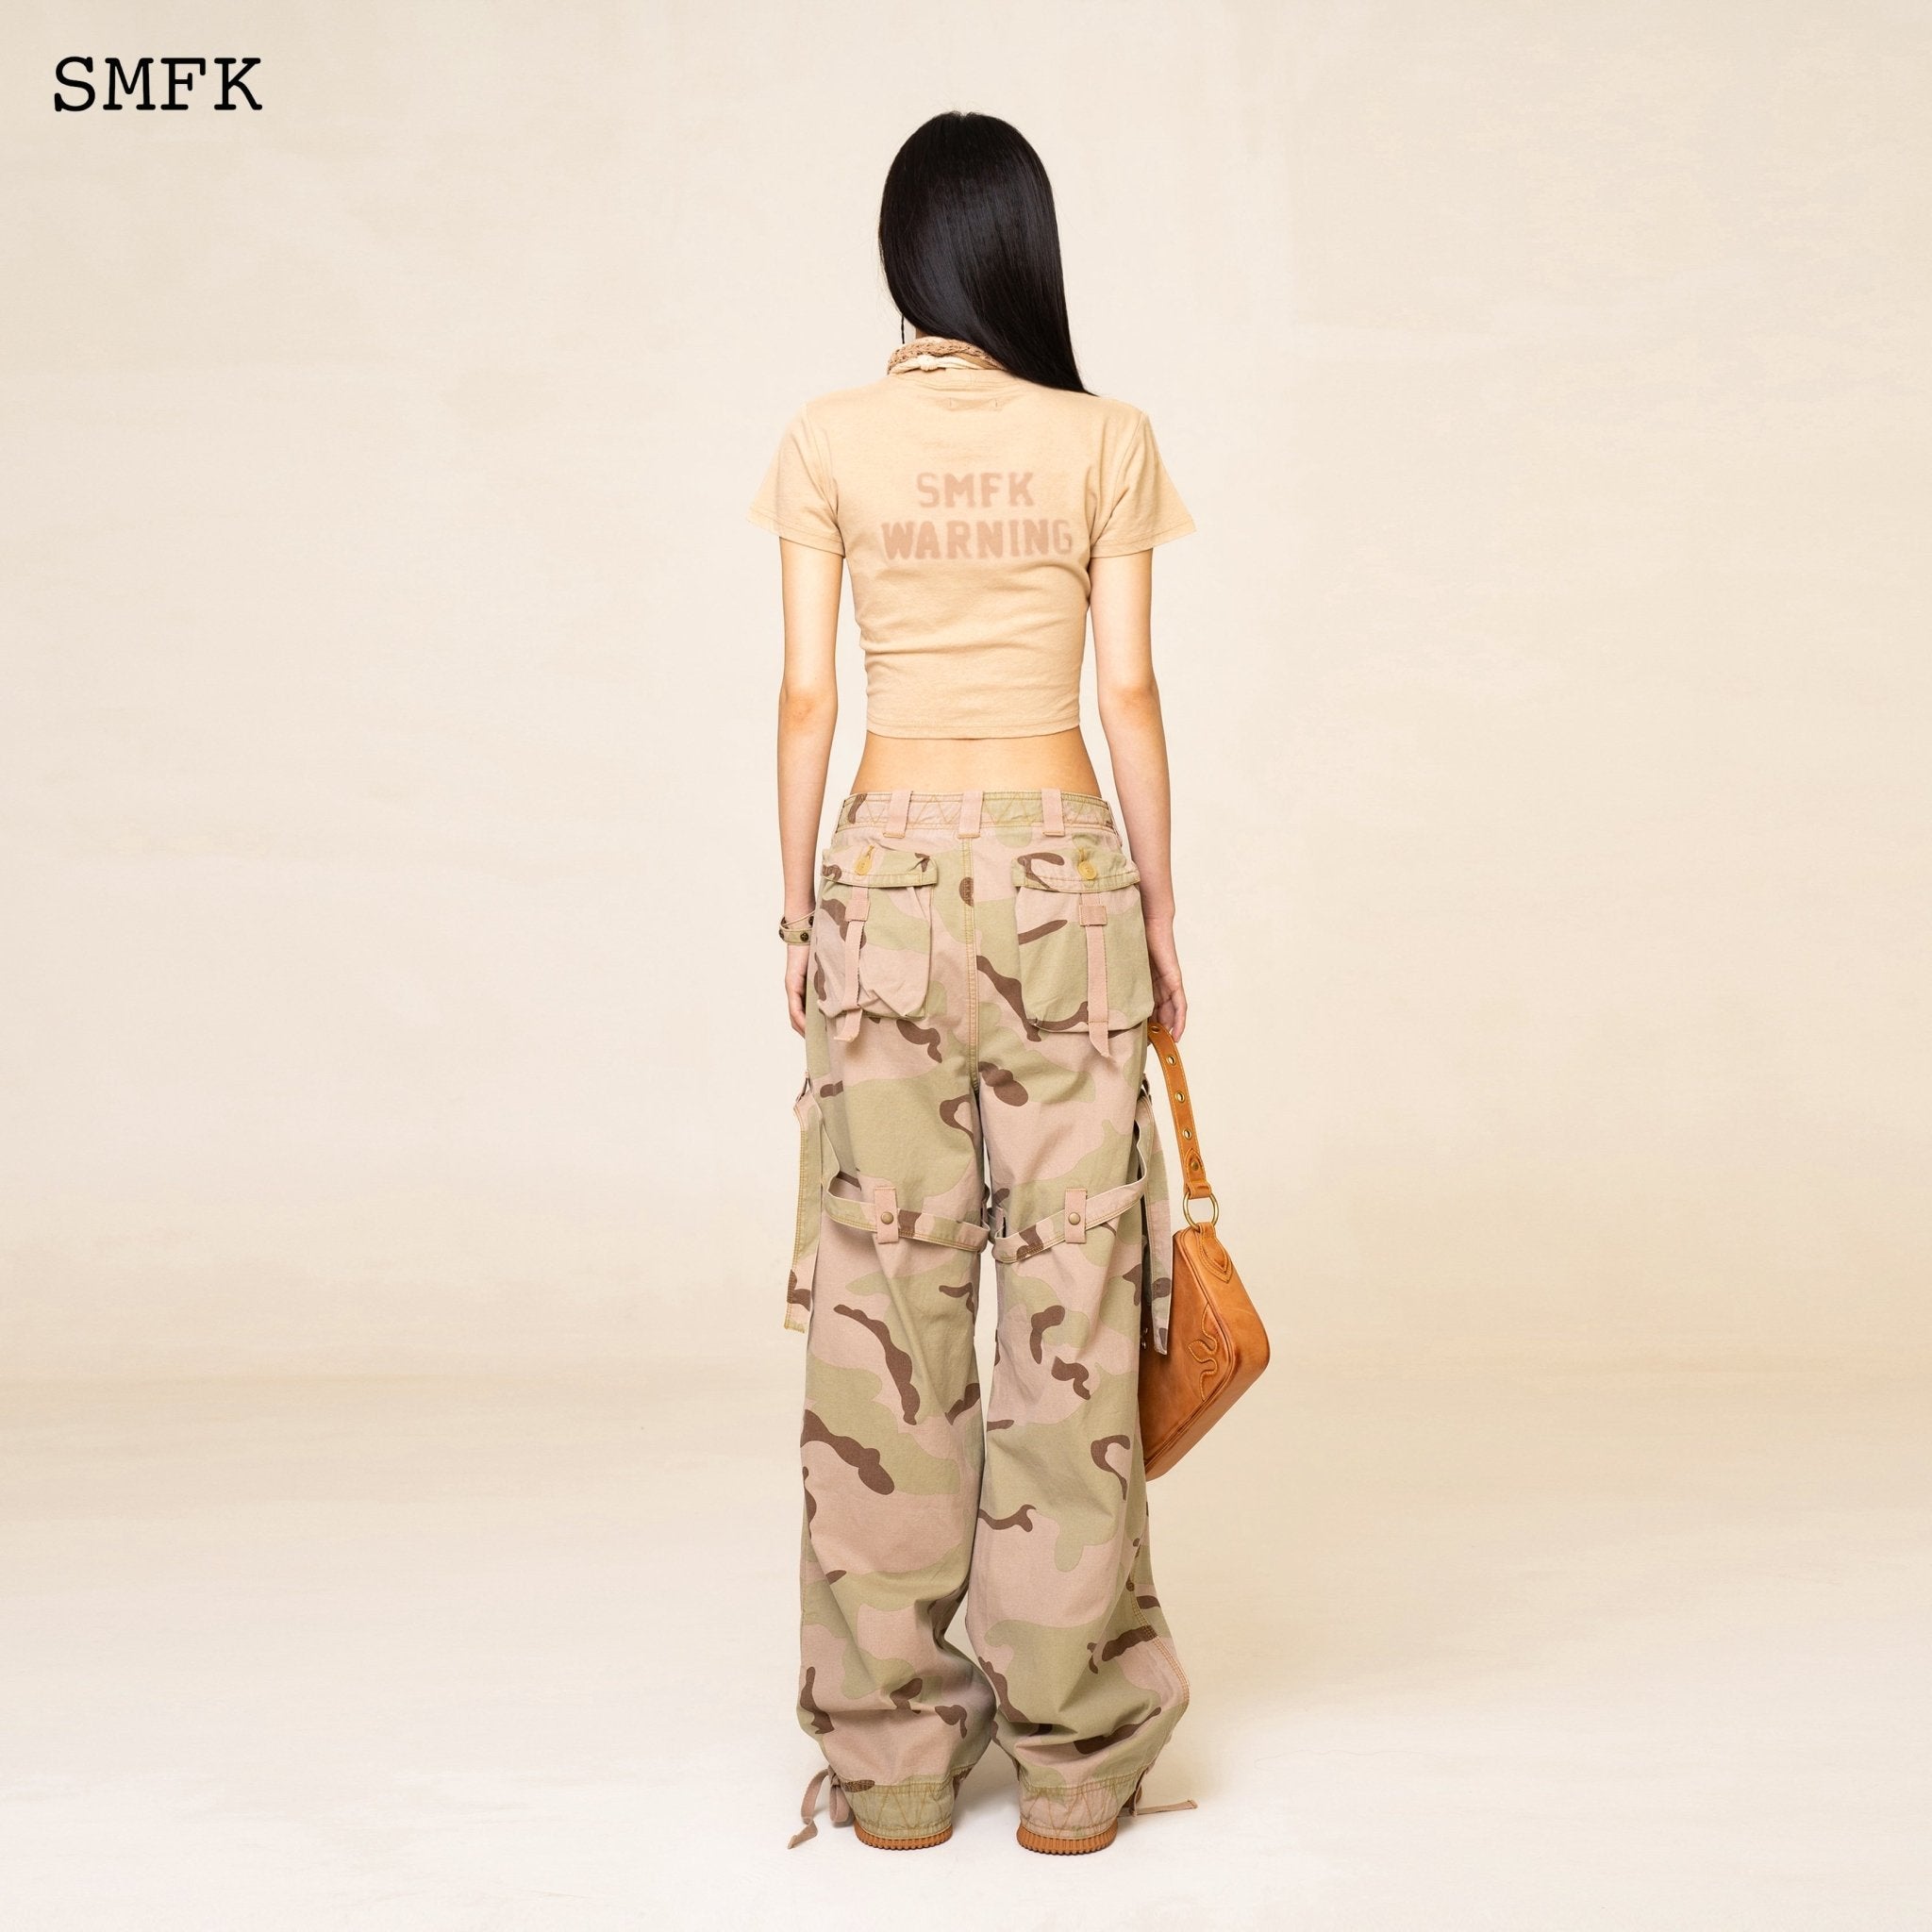 SMFK Compass Cross Slim-Fit Tee In Wheat | MADA IN CHINA